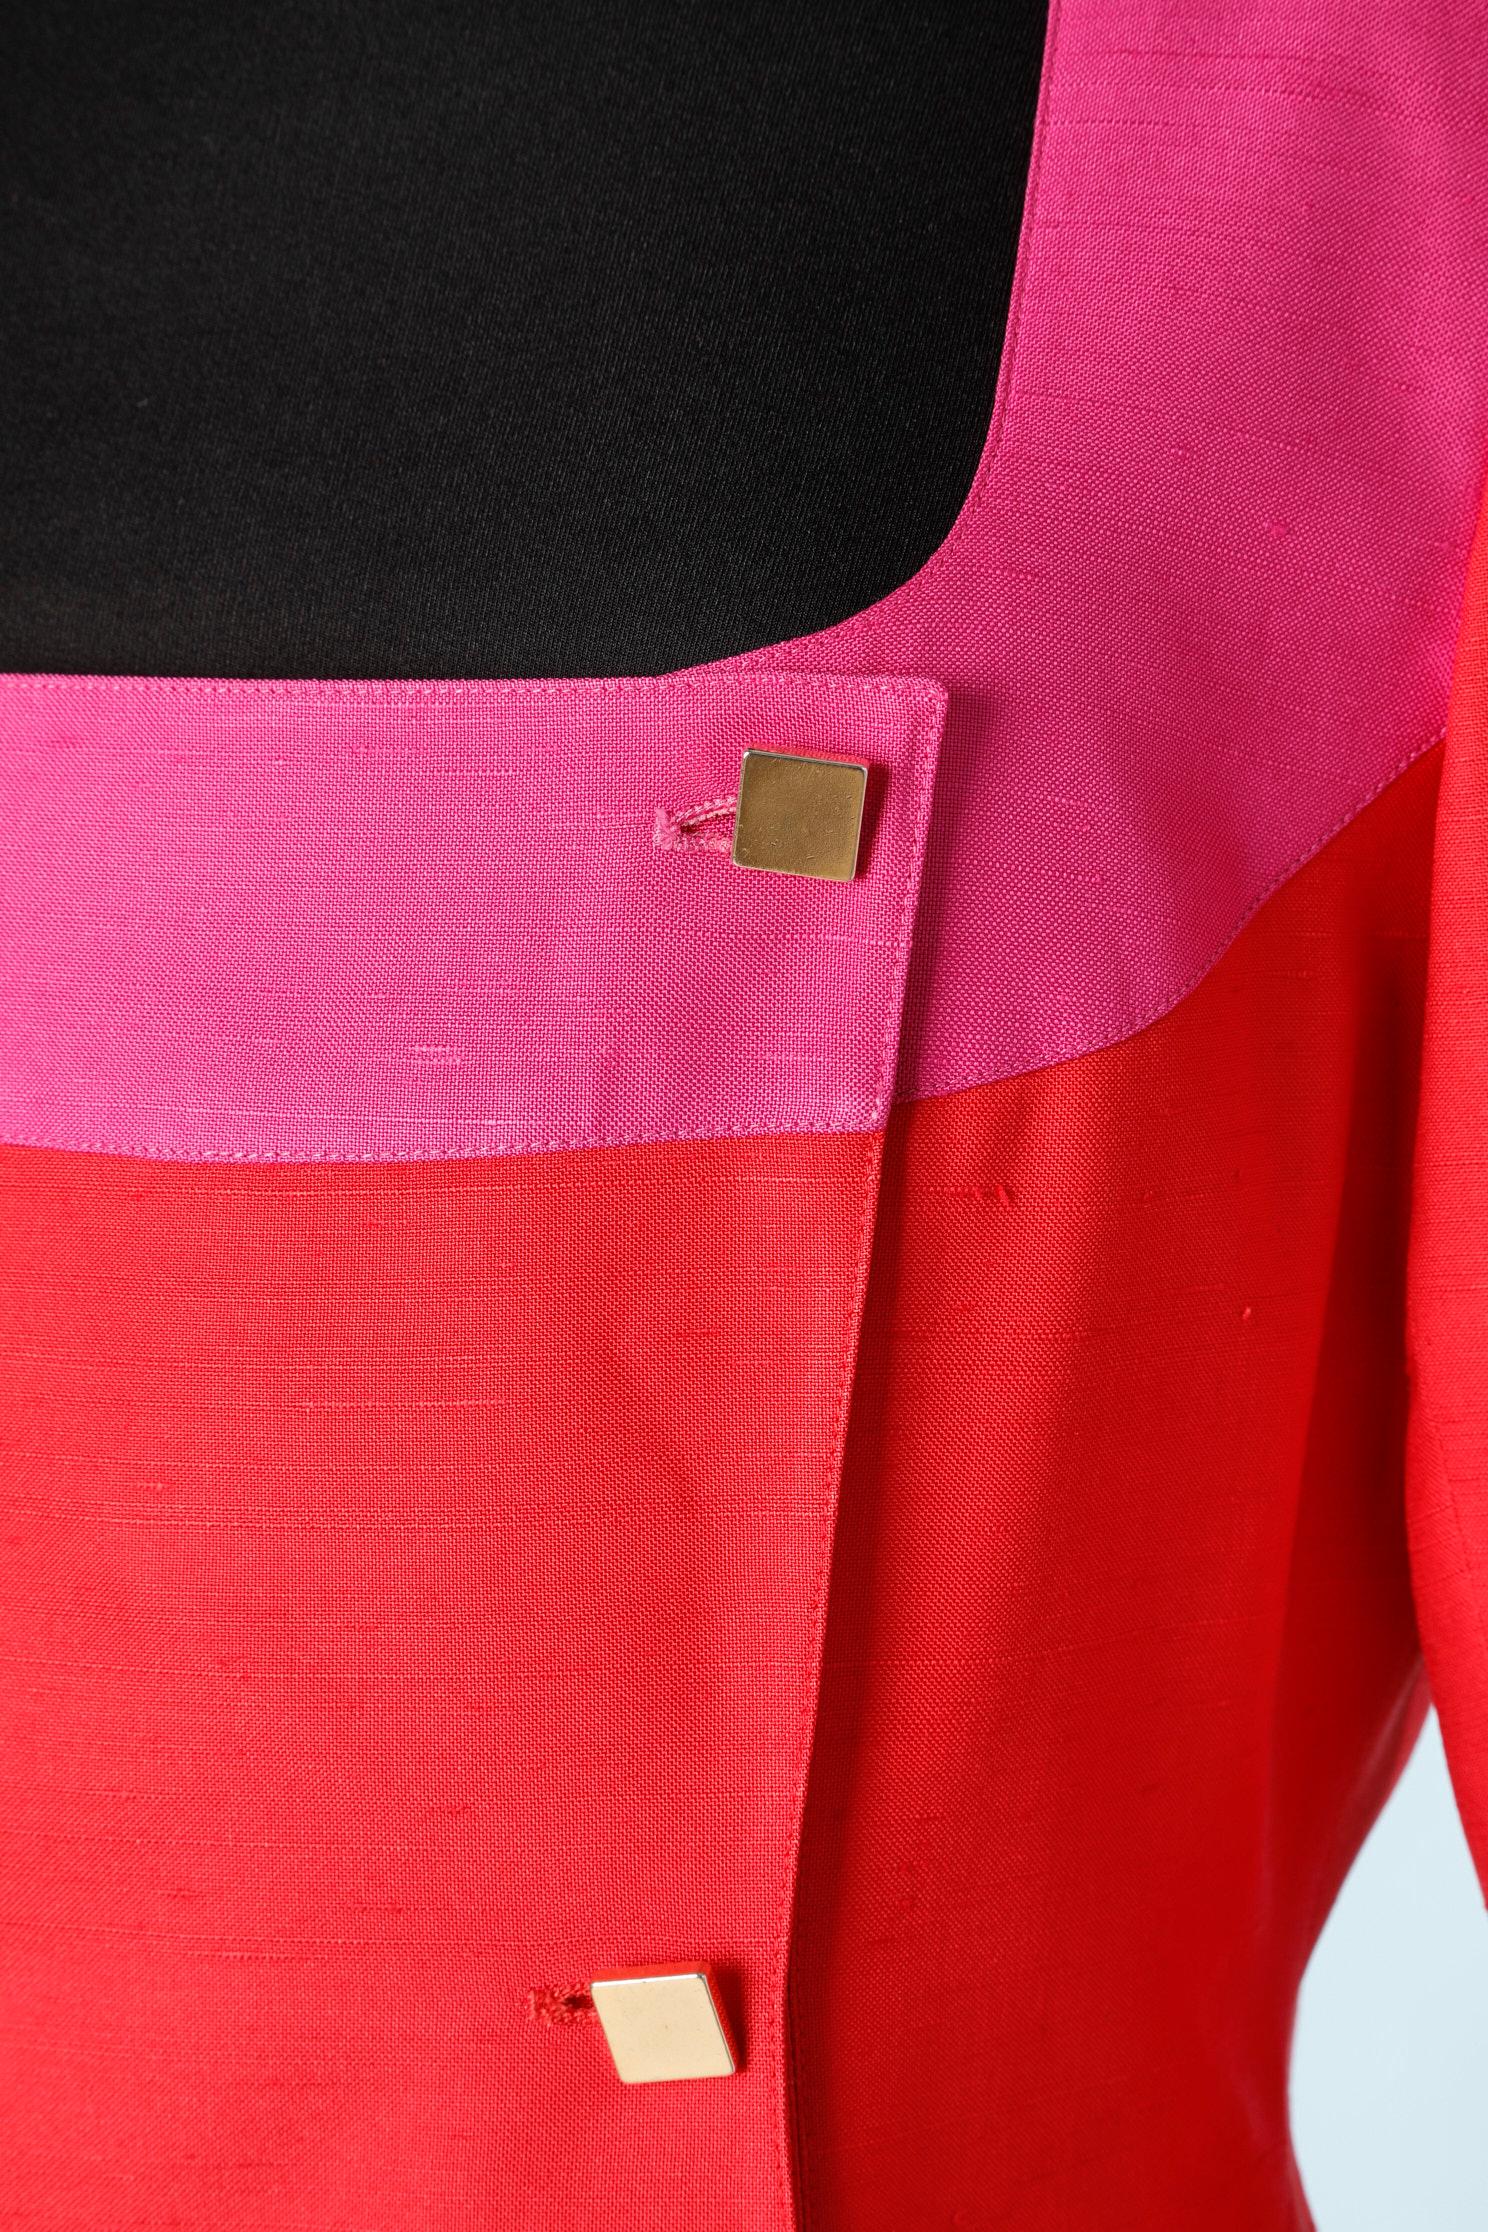 Double-breasted jacket in wild silk pink and red . Gold metallic button.
Knee -lenght skirt 
Acetate lining 